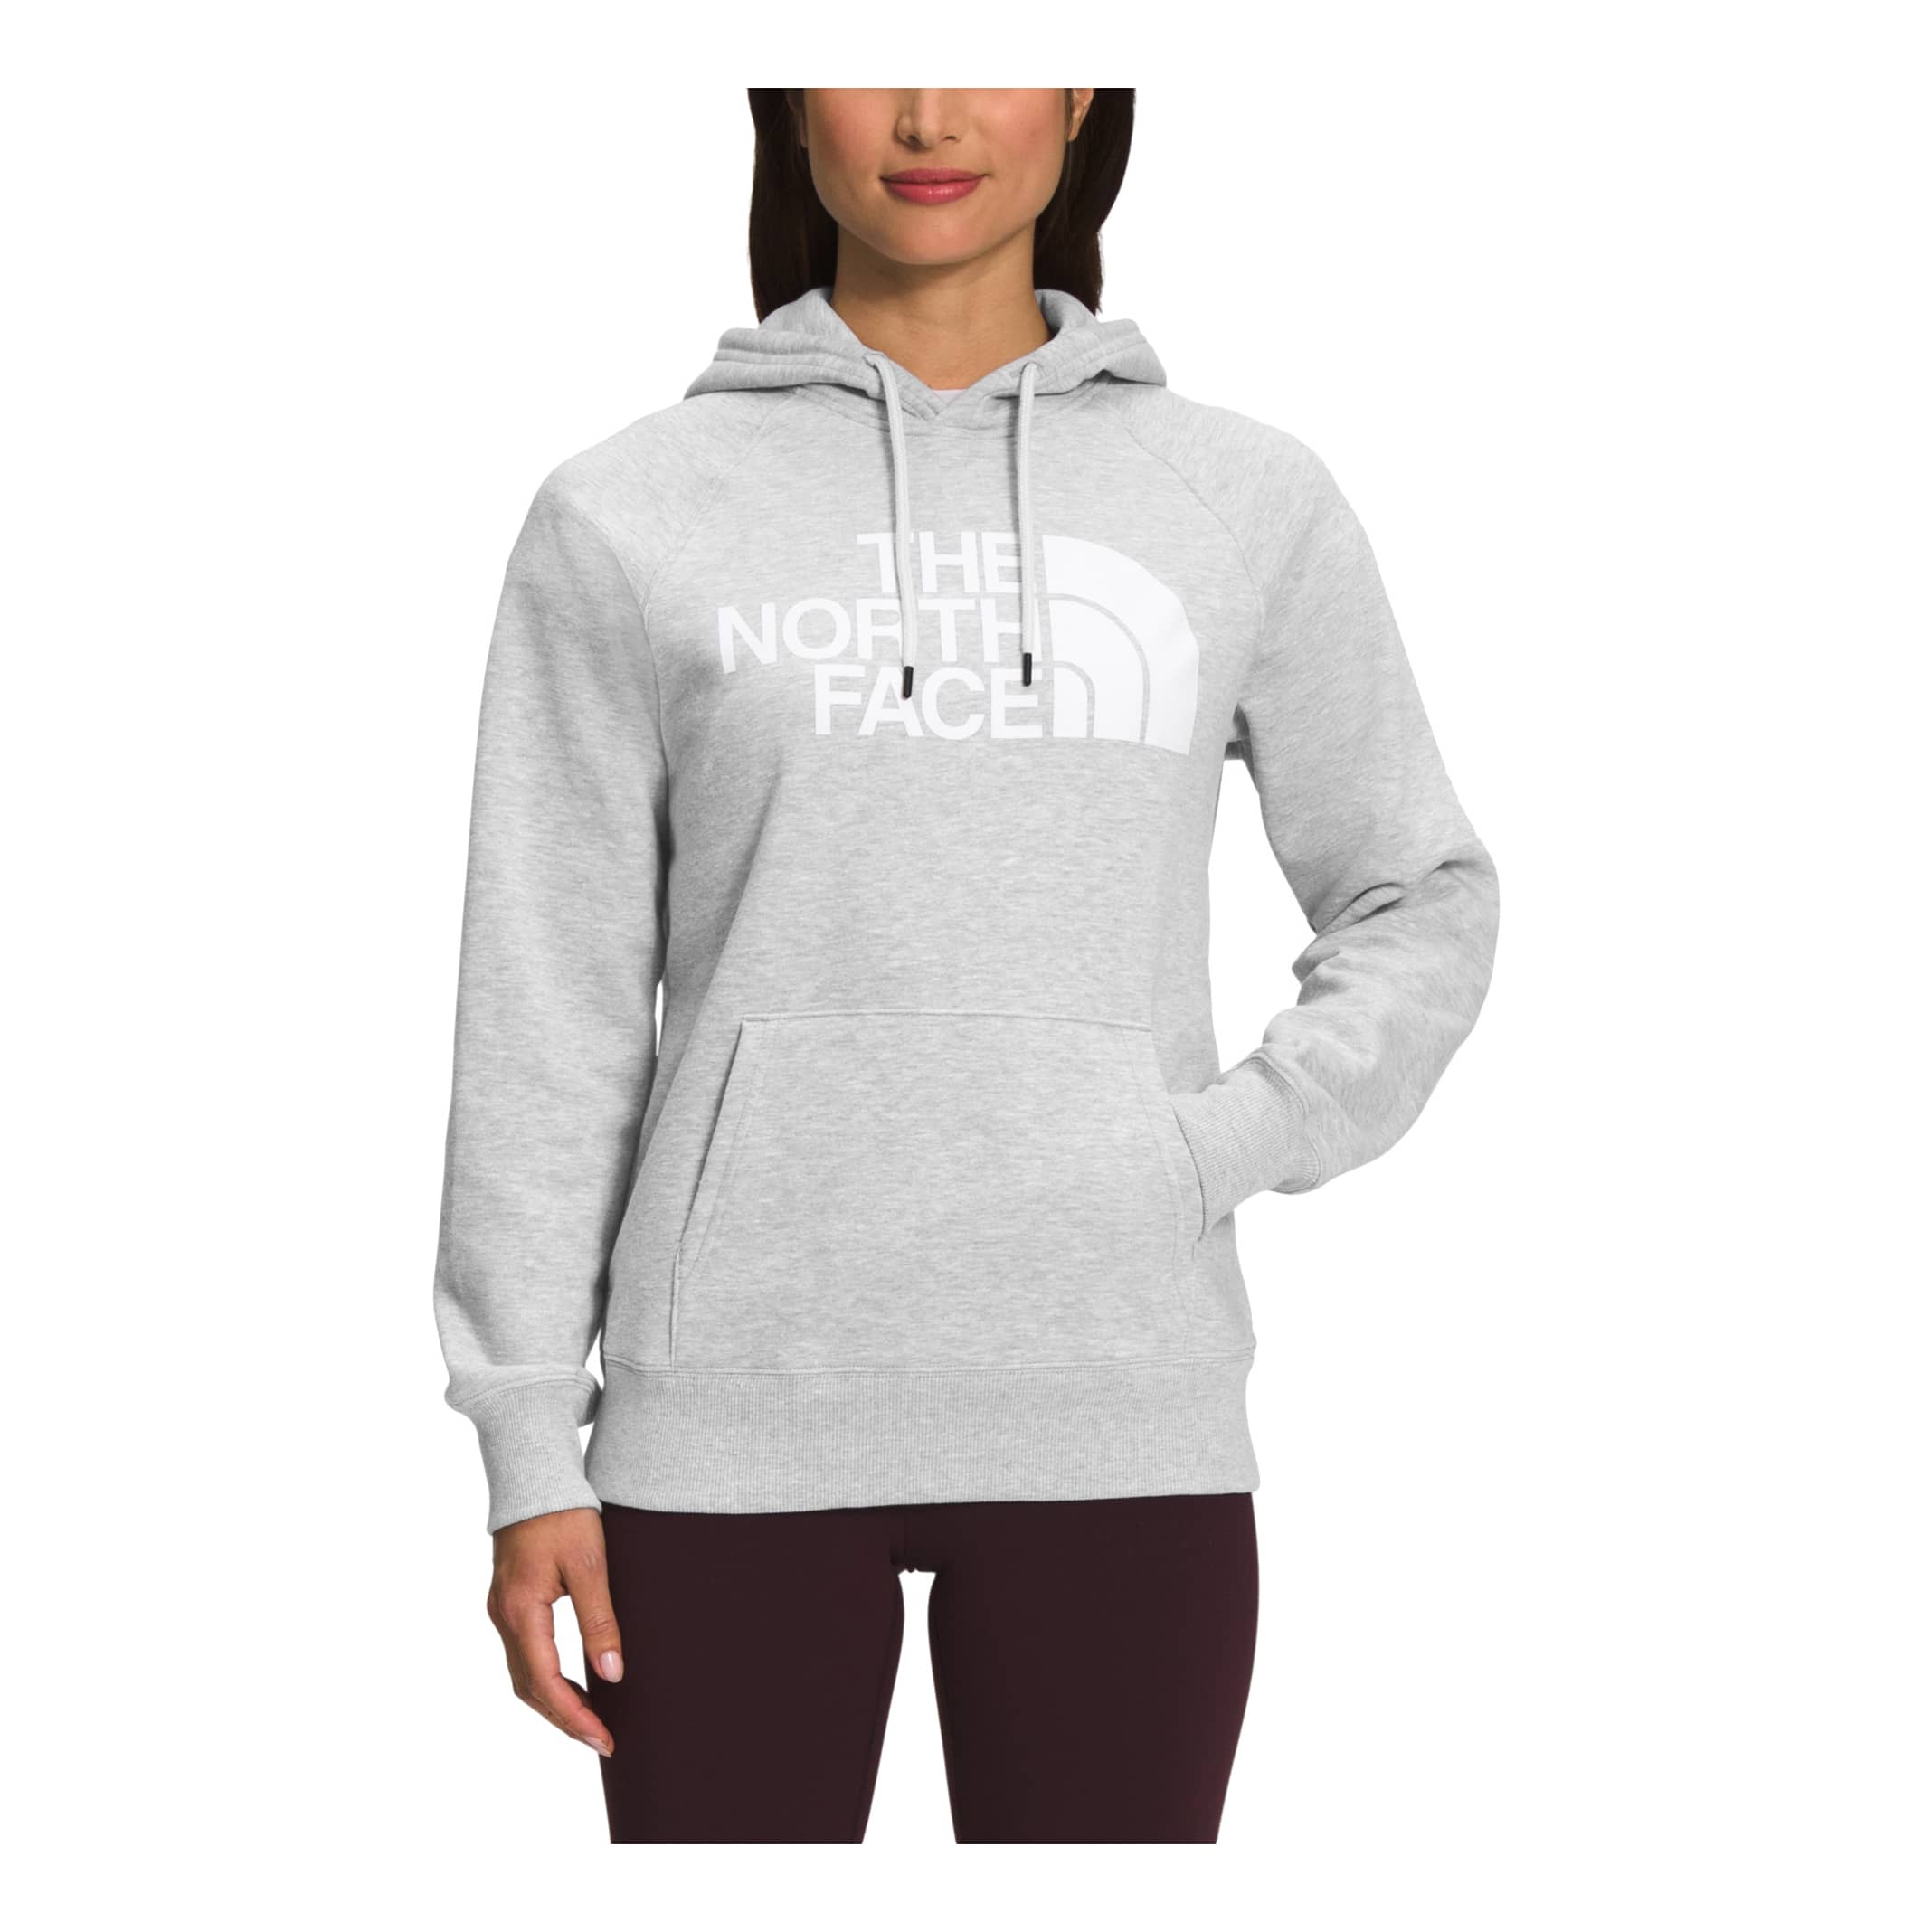 The North Face® Women’s Half Dome Hoodie - Grey Heather